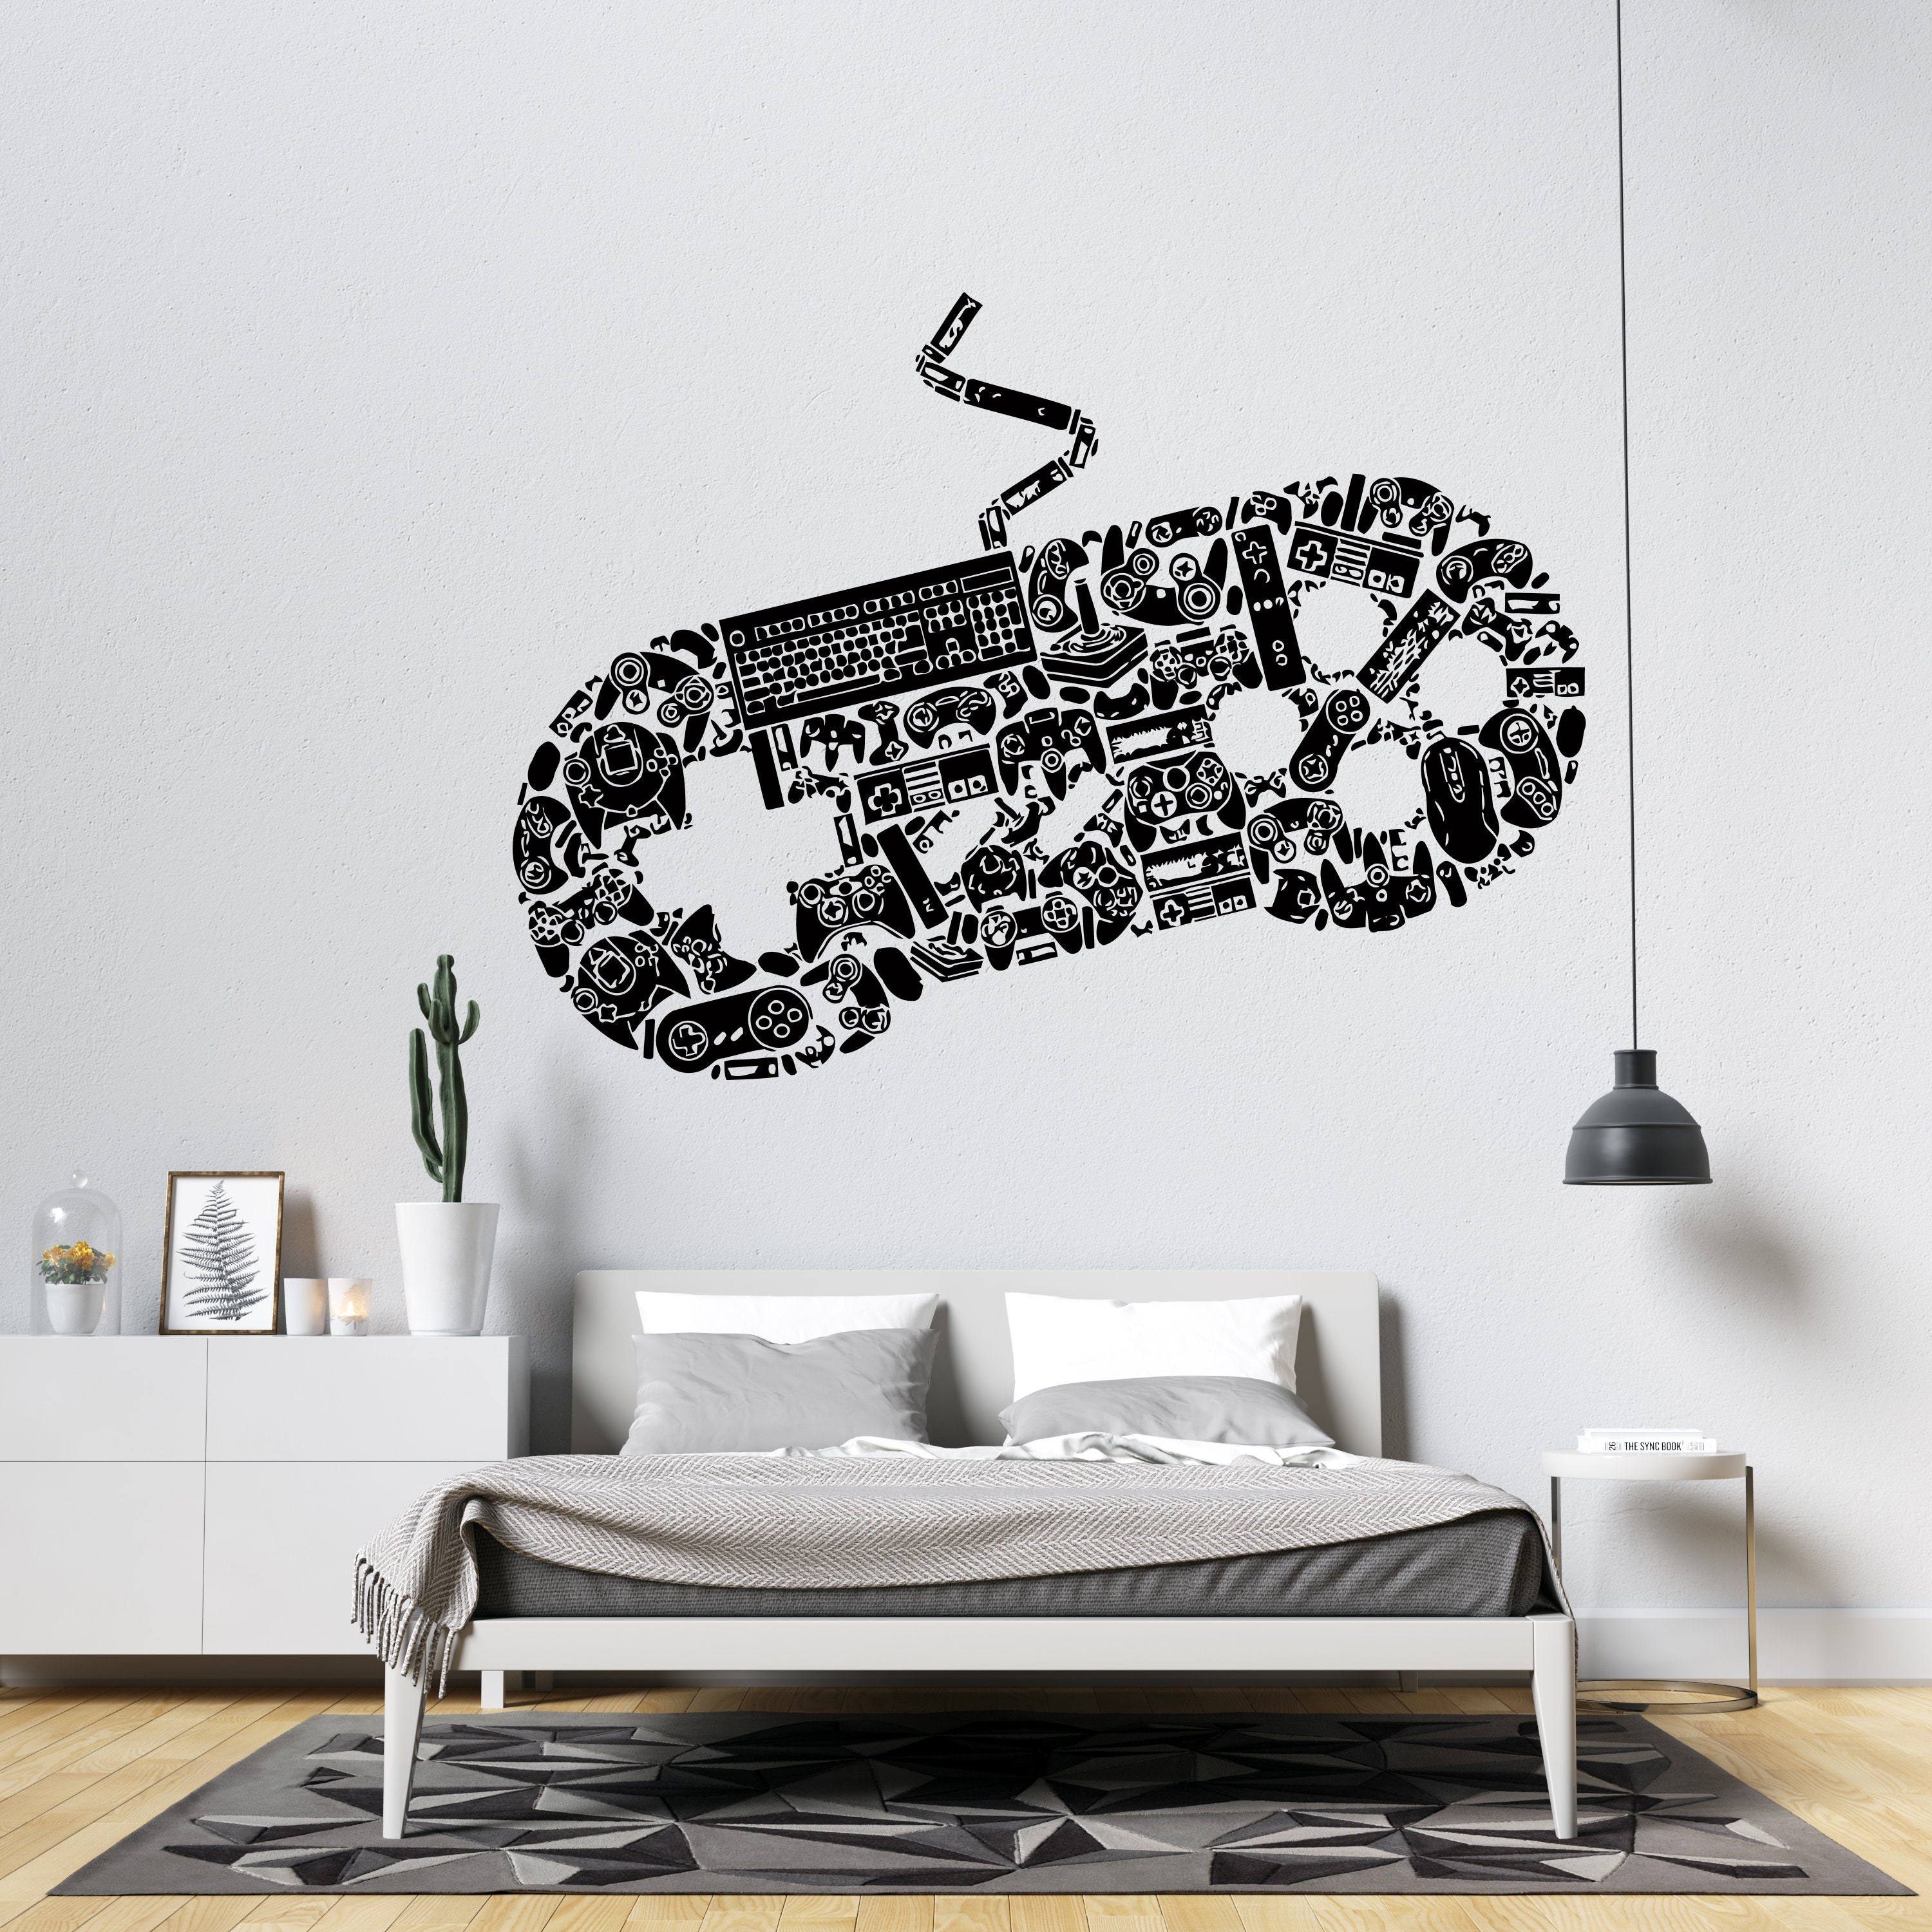 LEAQU Gamer Wall Sticker Boy with Game Controller Wall Decals, Creative  Waterproof Self-Adhesive Video Game Wall Posters Gaming Wallpaper Home  Decor for Kids Boys Room Bedroom 